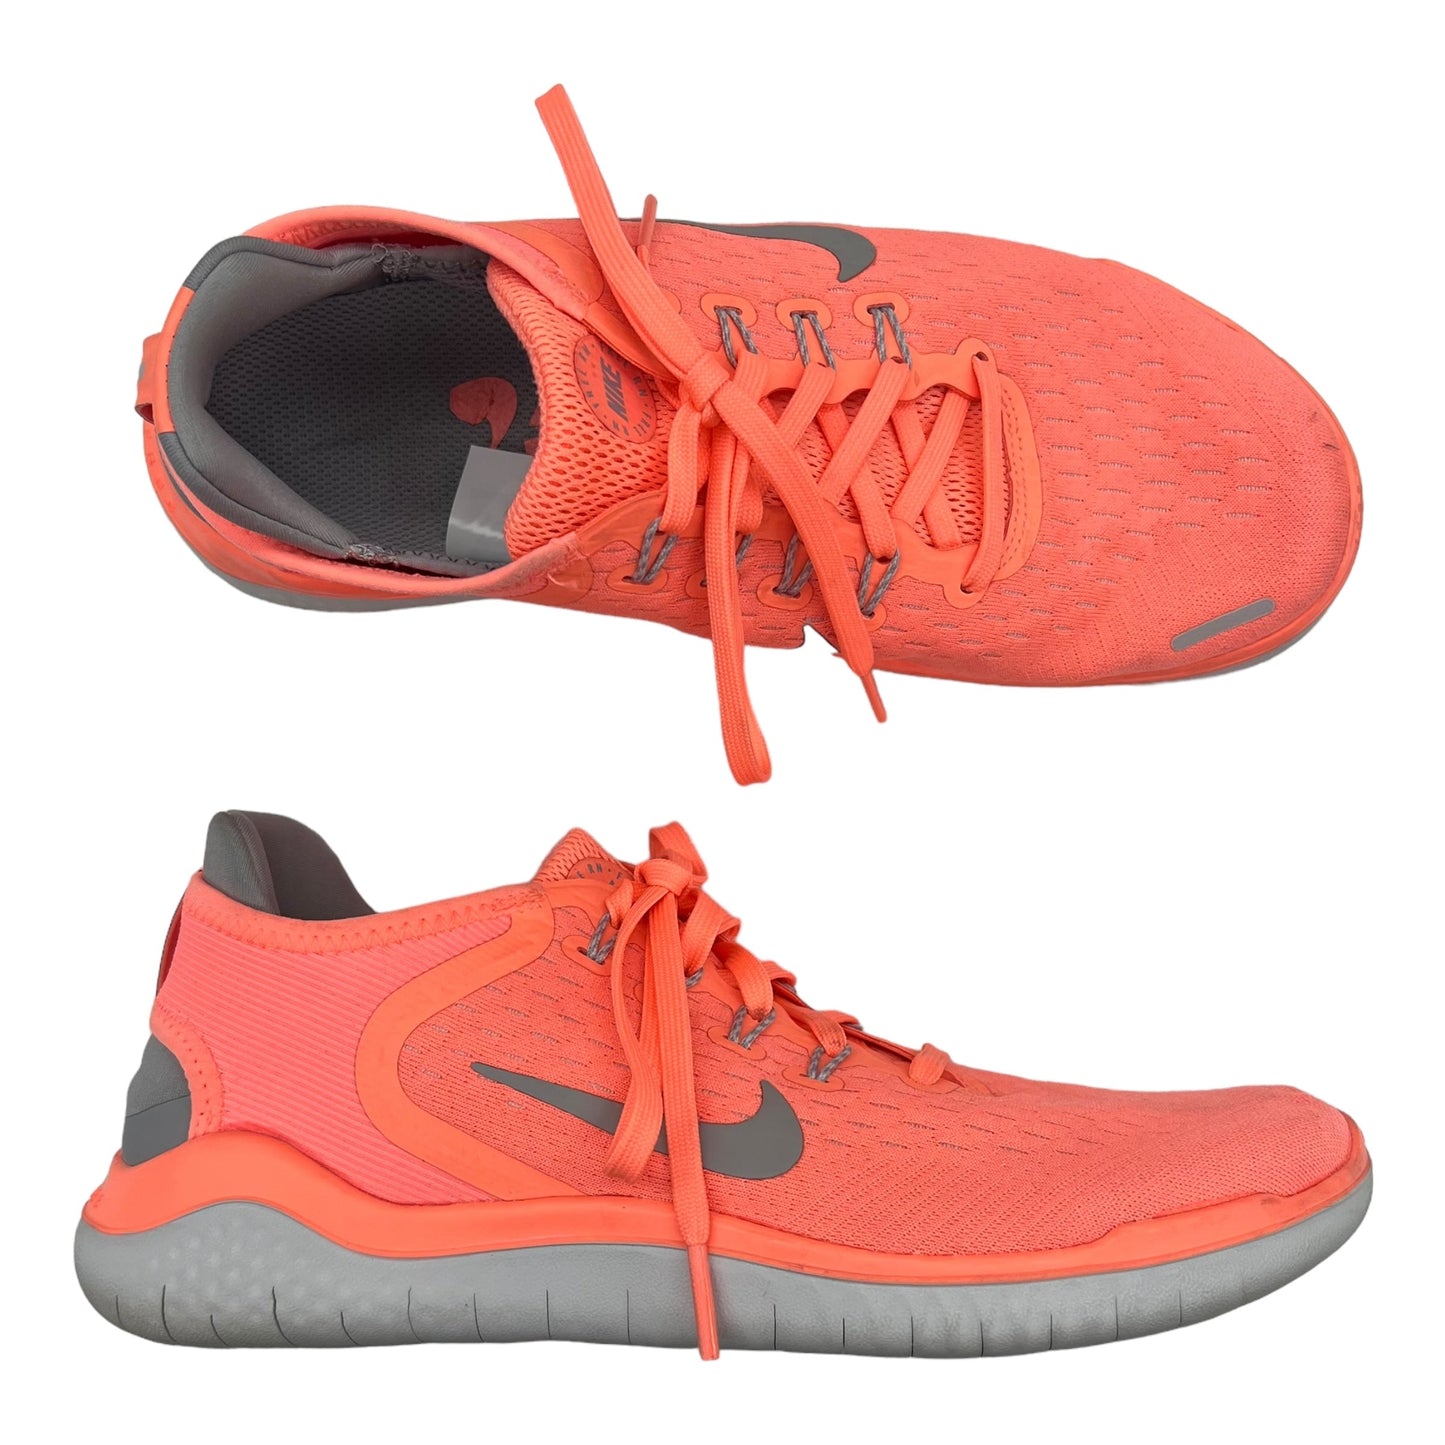 CORAL NIKE APPAREL SHOES ATHLETIC, Size 8.5